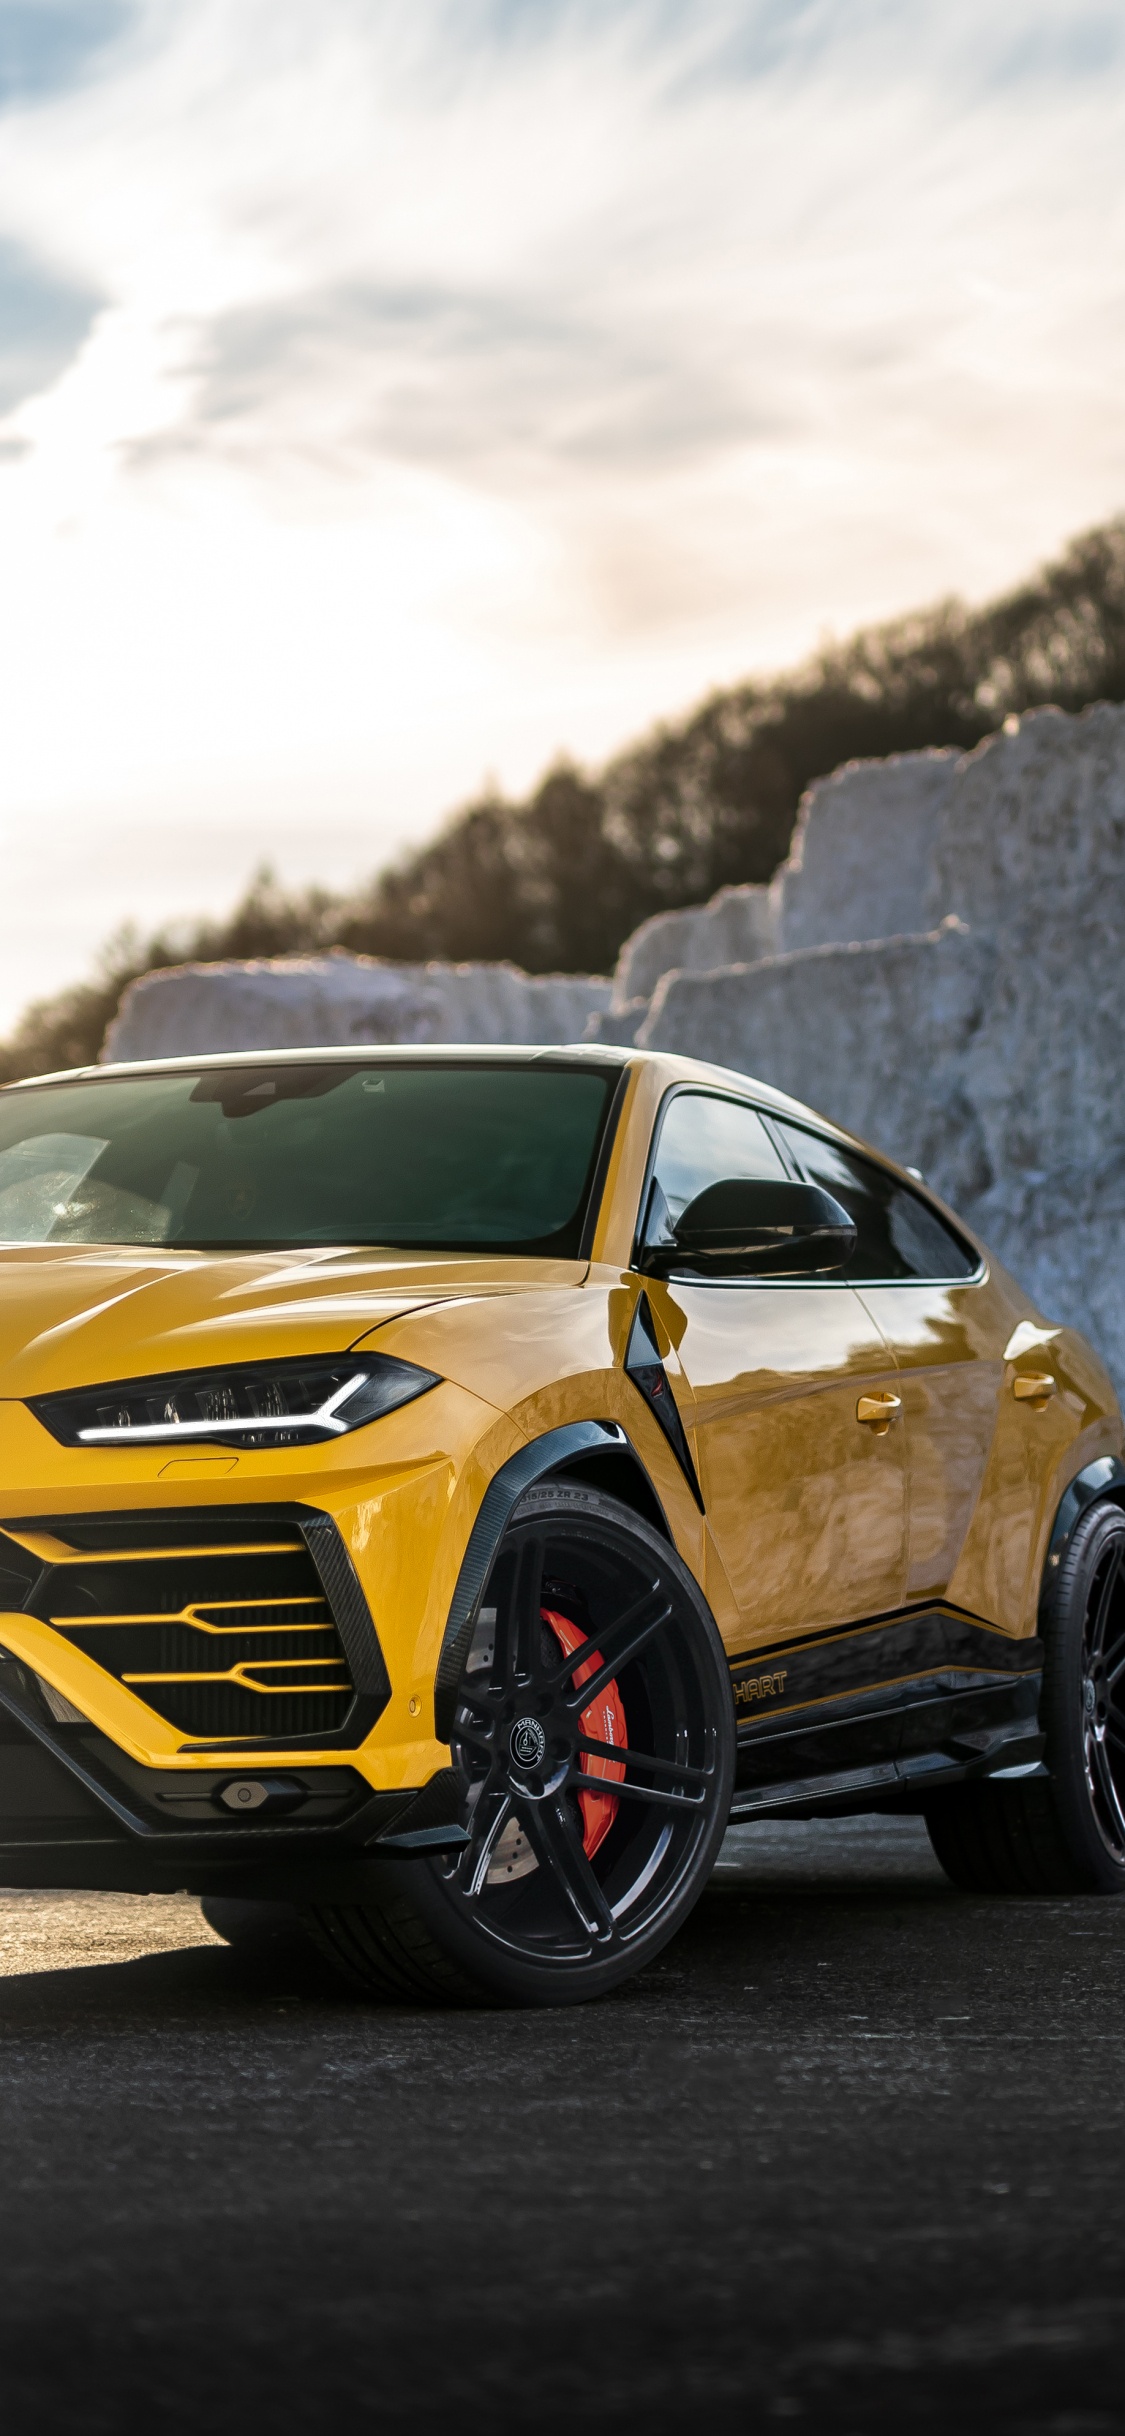 Yellow and Black Chevrolet Camaro on Road During Daytime. Wallpaper in 1125x2436 Resolution